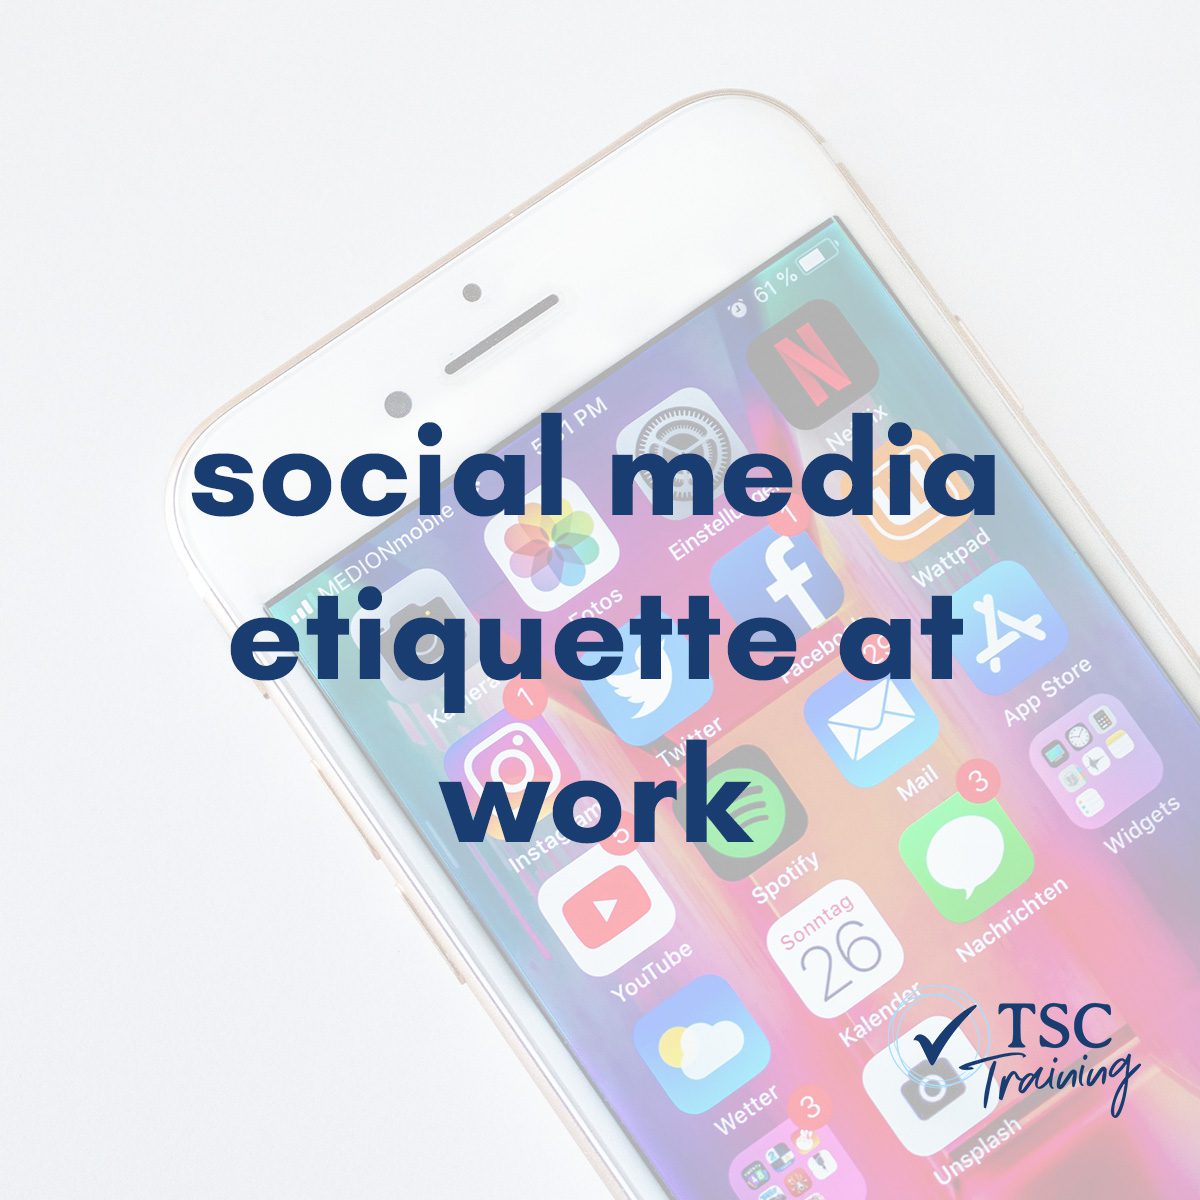 Social Media etiquette at work - TSC Group Online Training Course